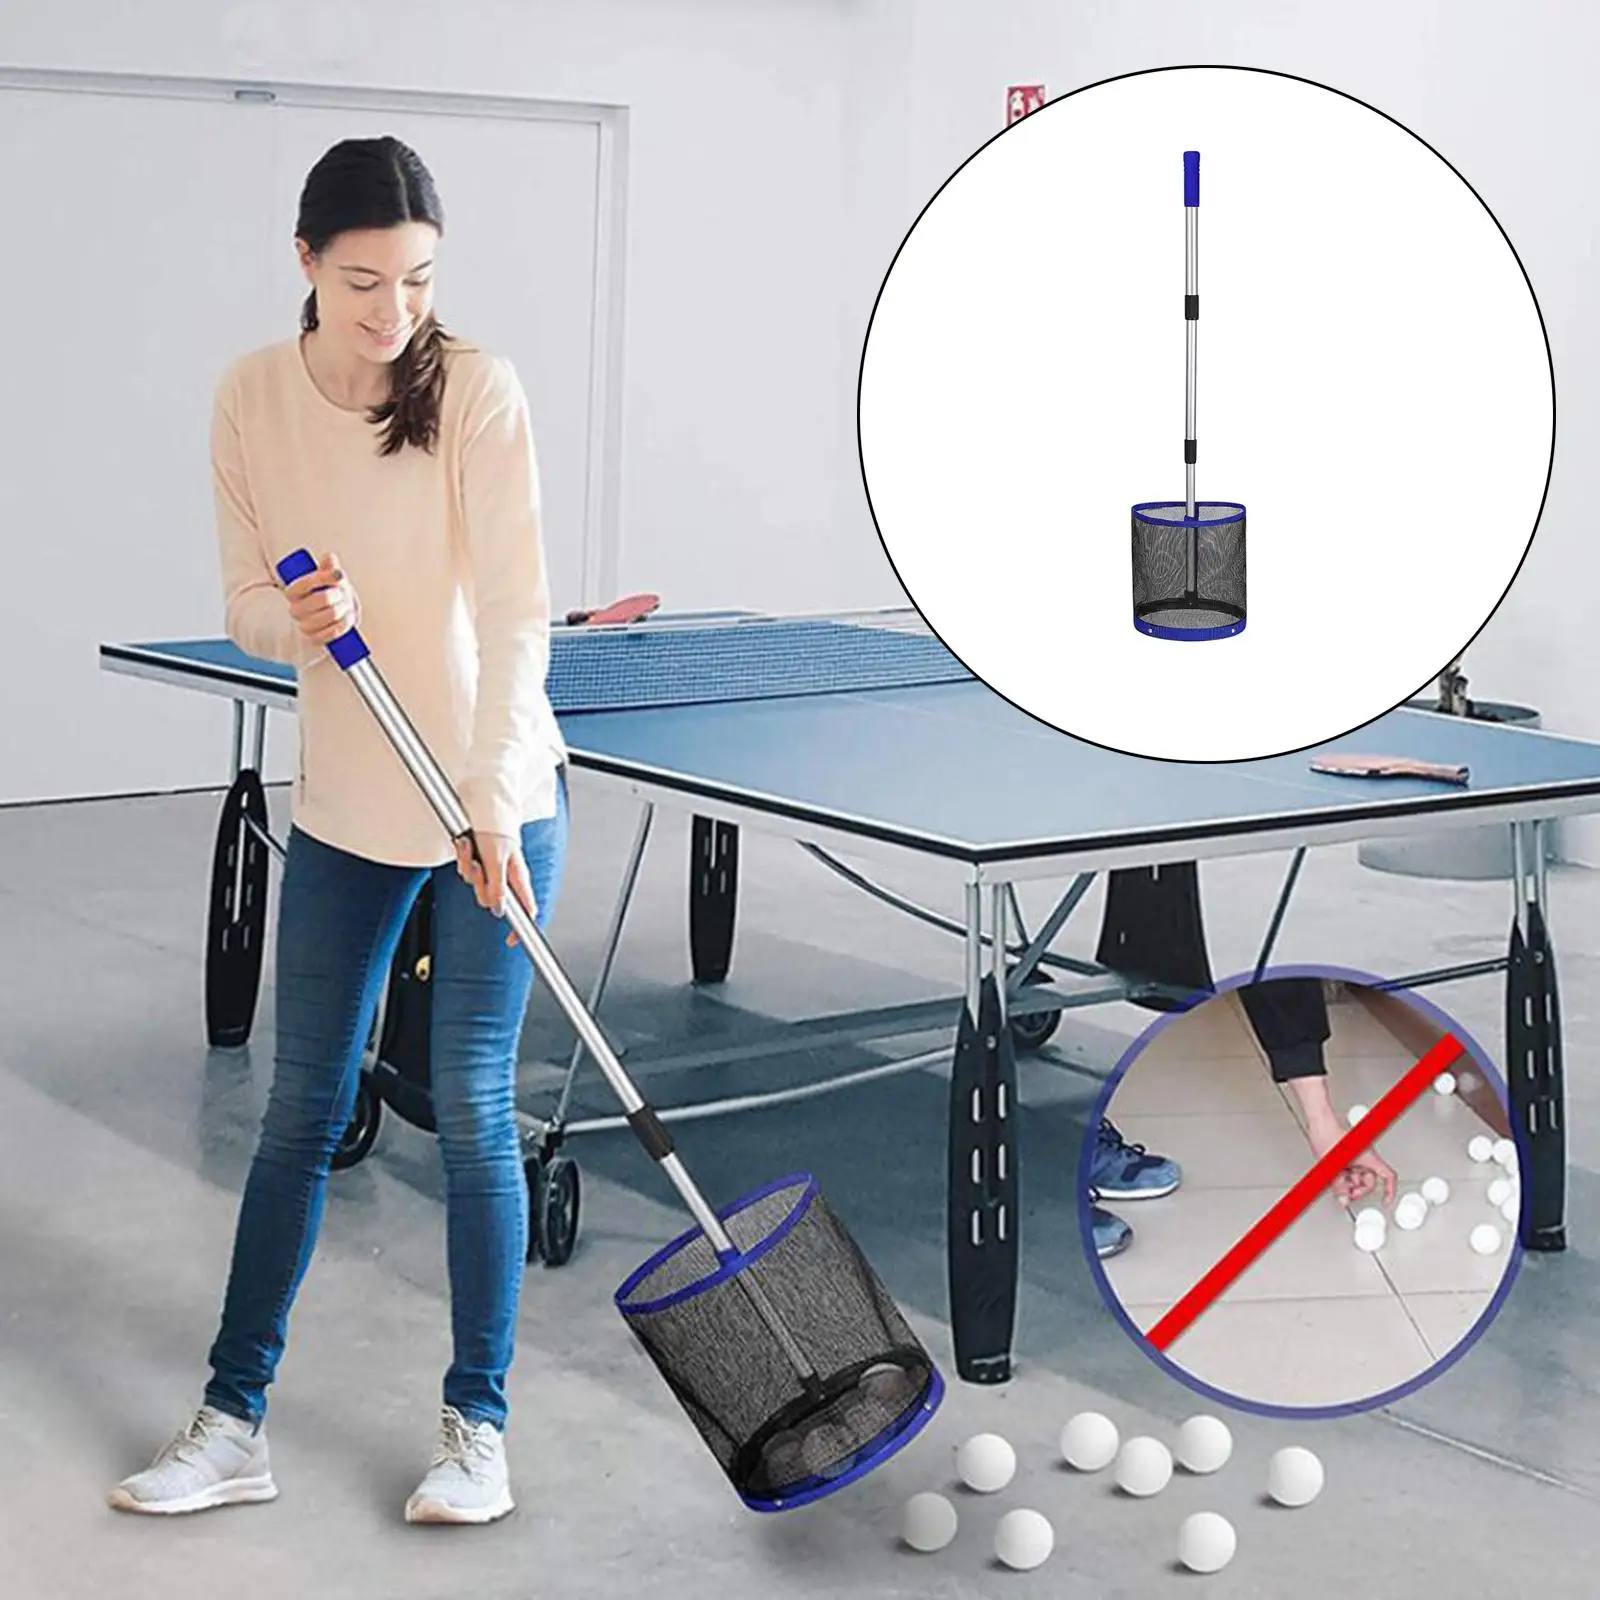 Adjustable Table Tennis Ball Picker Upper  Pong Picker Picking and Storage